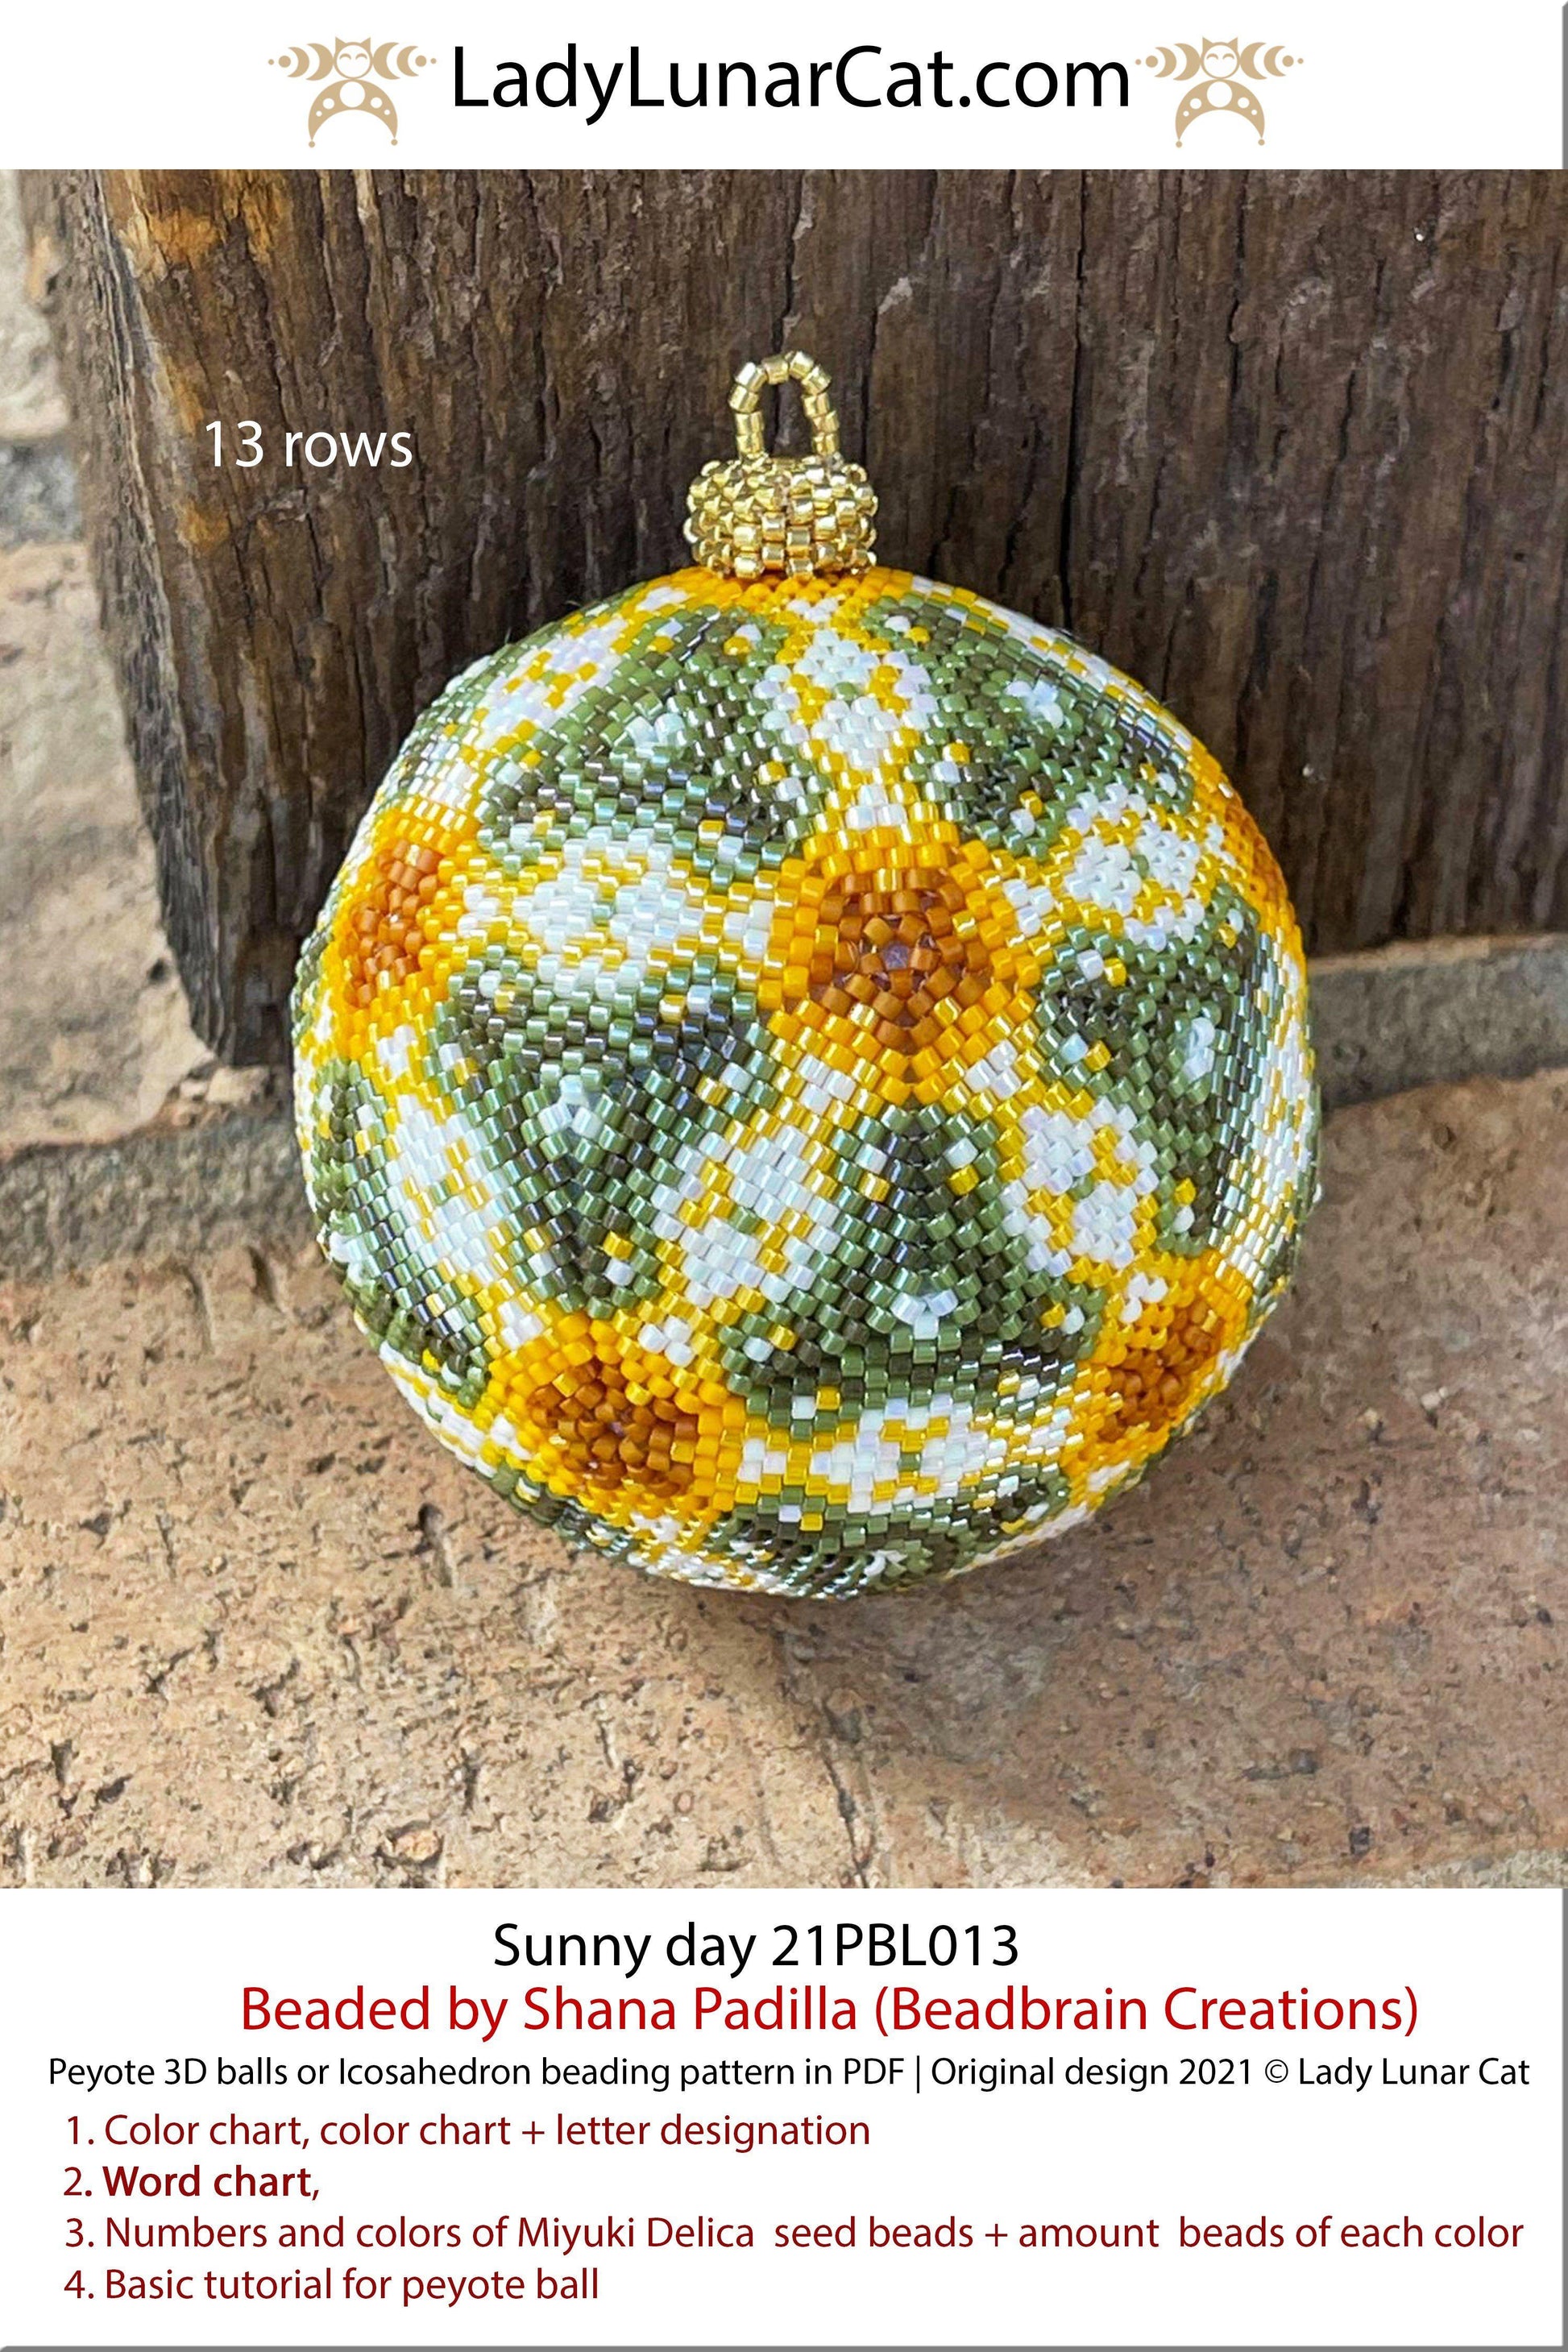 Peyote 3d ball pattern for beading | Beaded Icosahedron Sunny day 21PBL013 13 rows LadyLunarCat